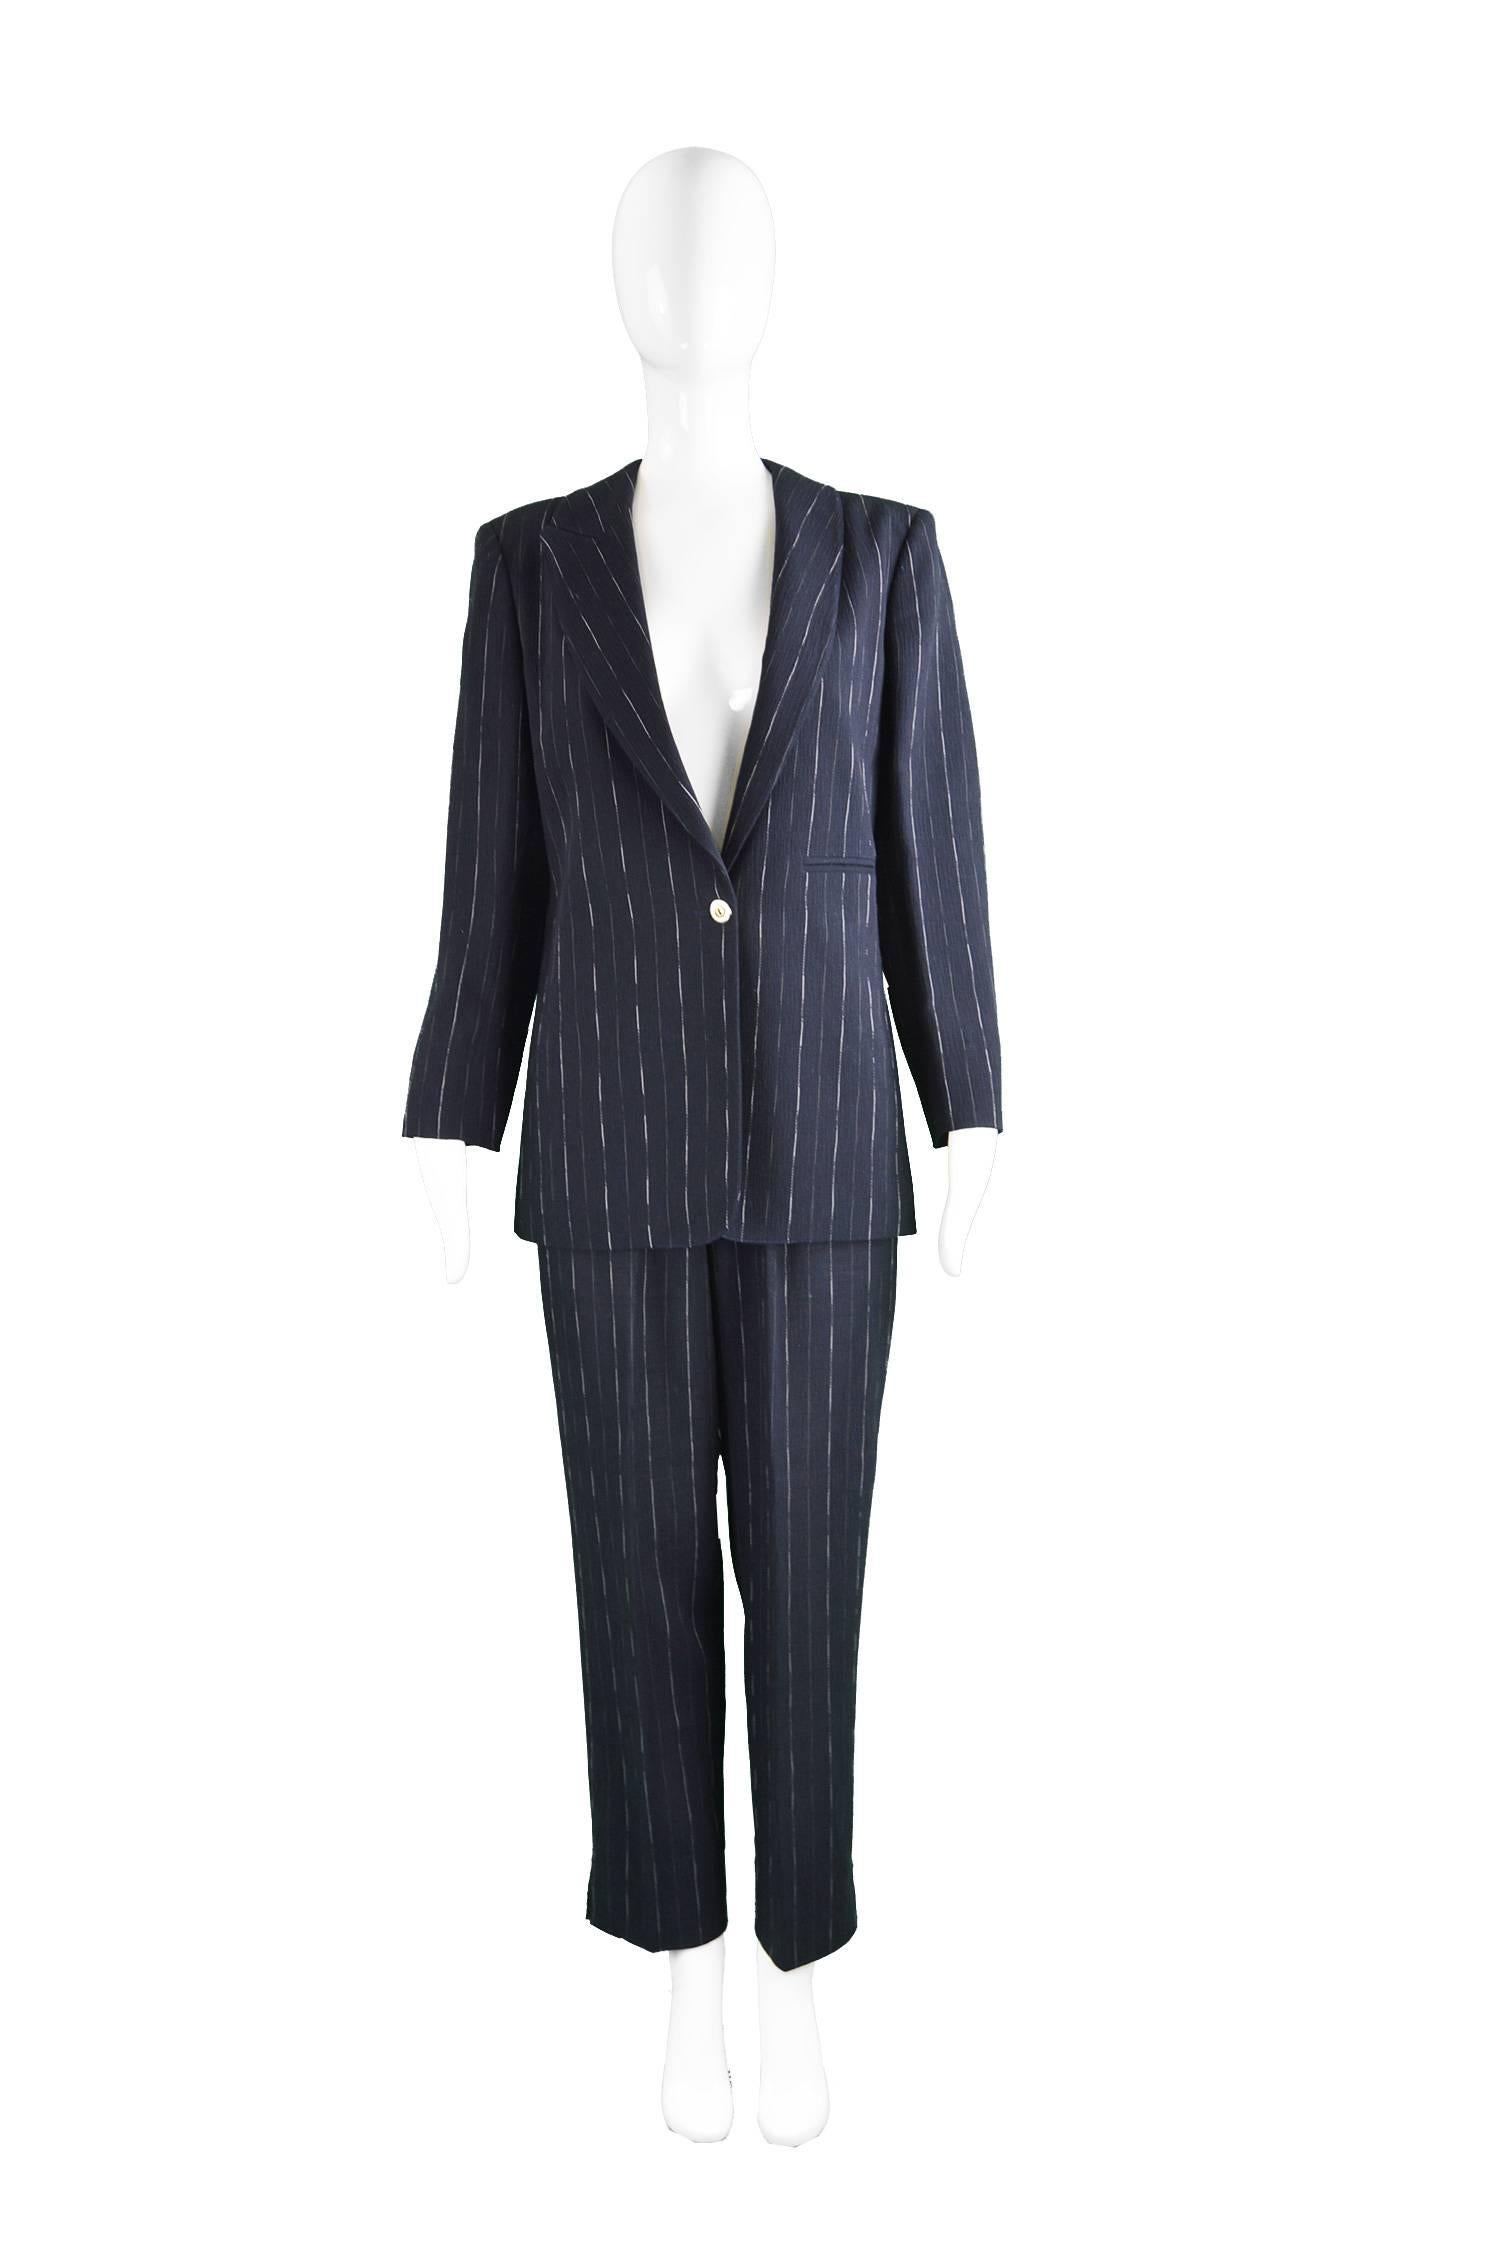 Claude Montana Women's Vintage Navy Blue Wool Pinstripe 2 Piece Pant Suit, 1990s

Size: The jacket is marked an 42 and the trousers a 44 but the jacket has a looser, slightly oversized fit so would suit a larger size. Estimated to be a modern UK